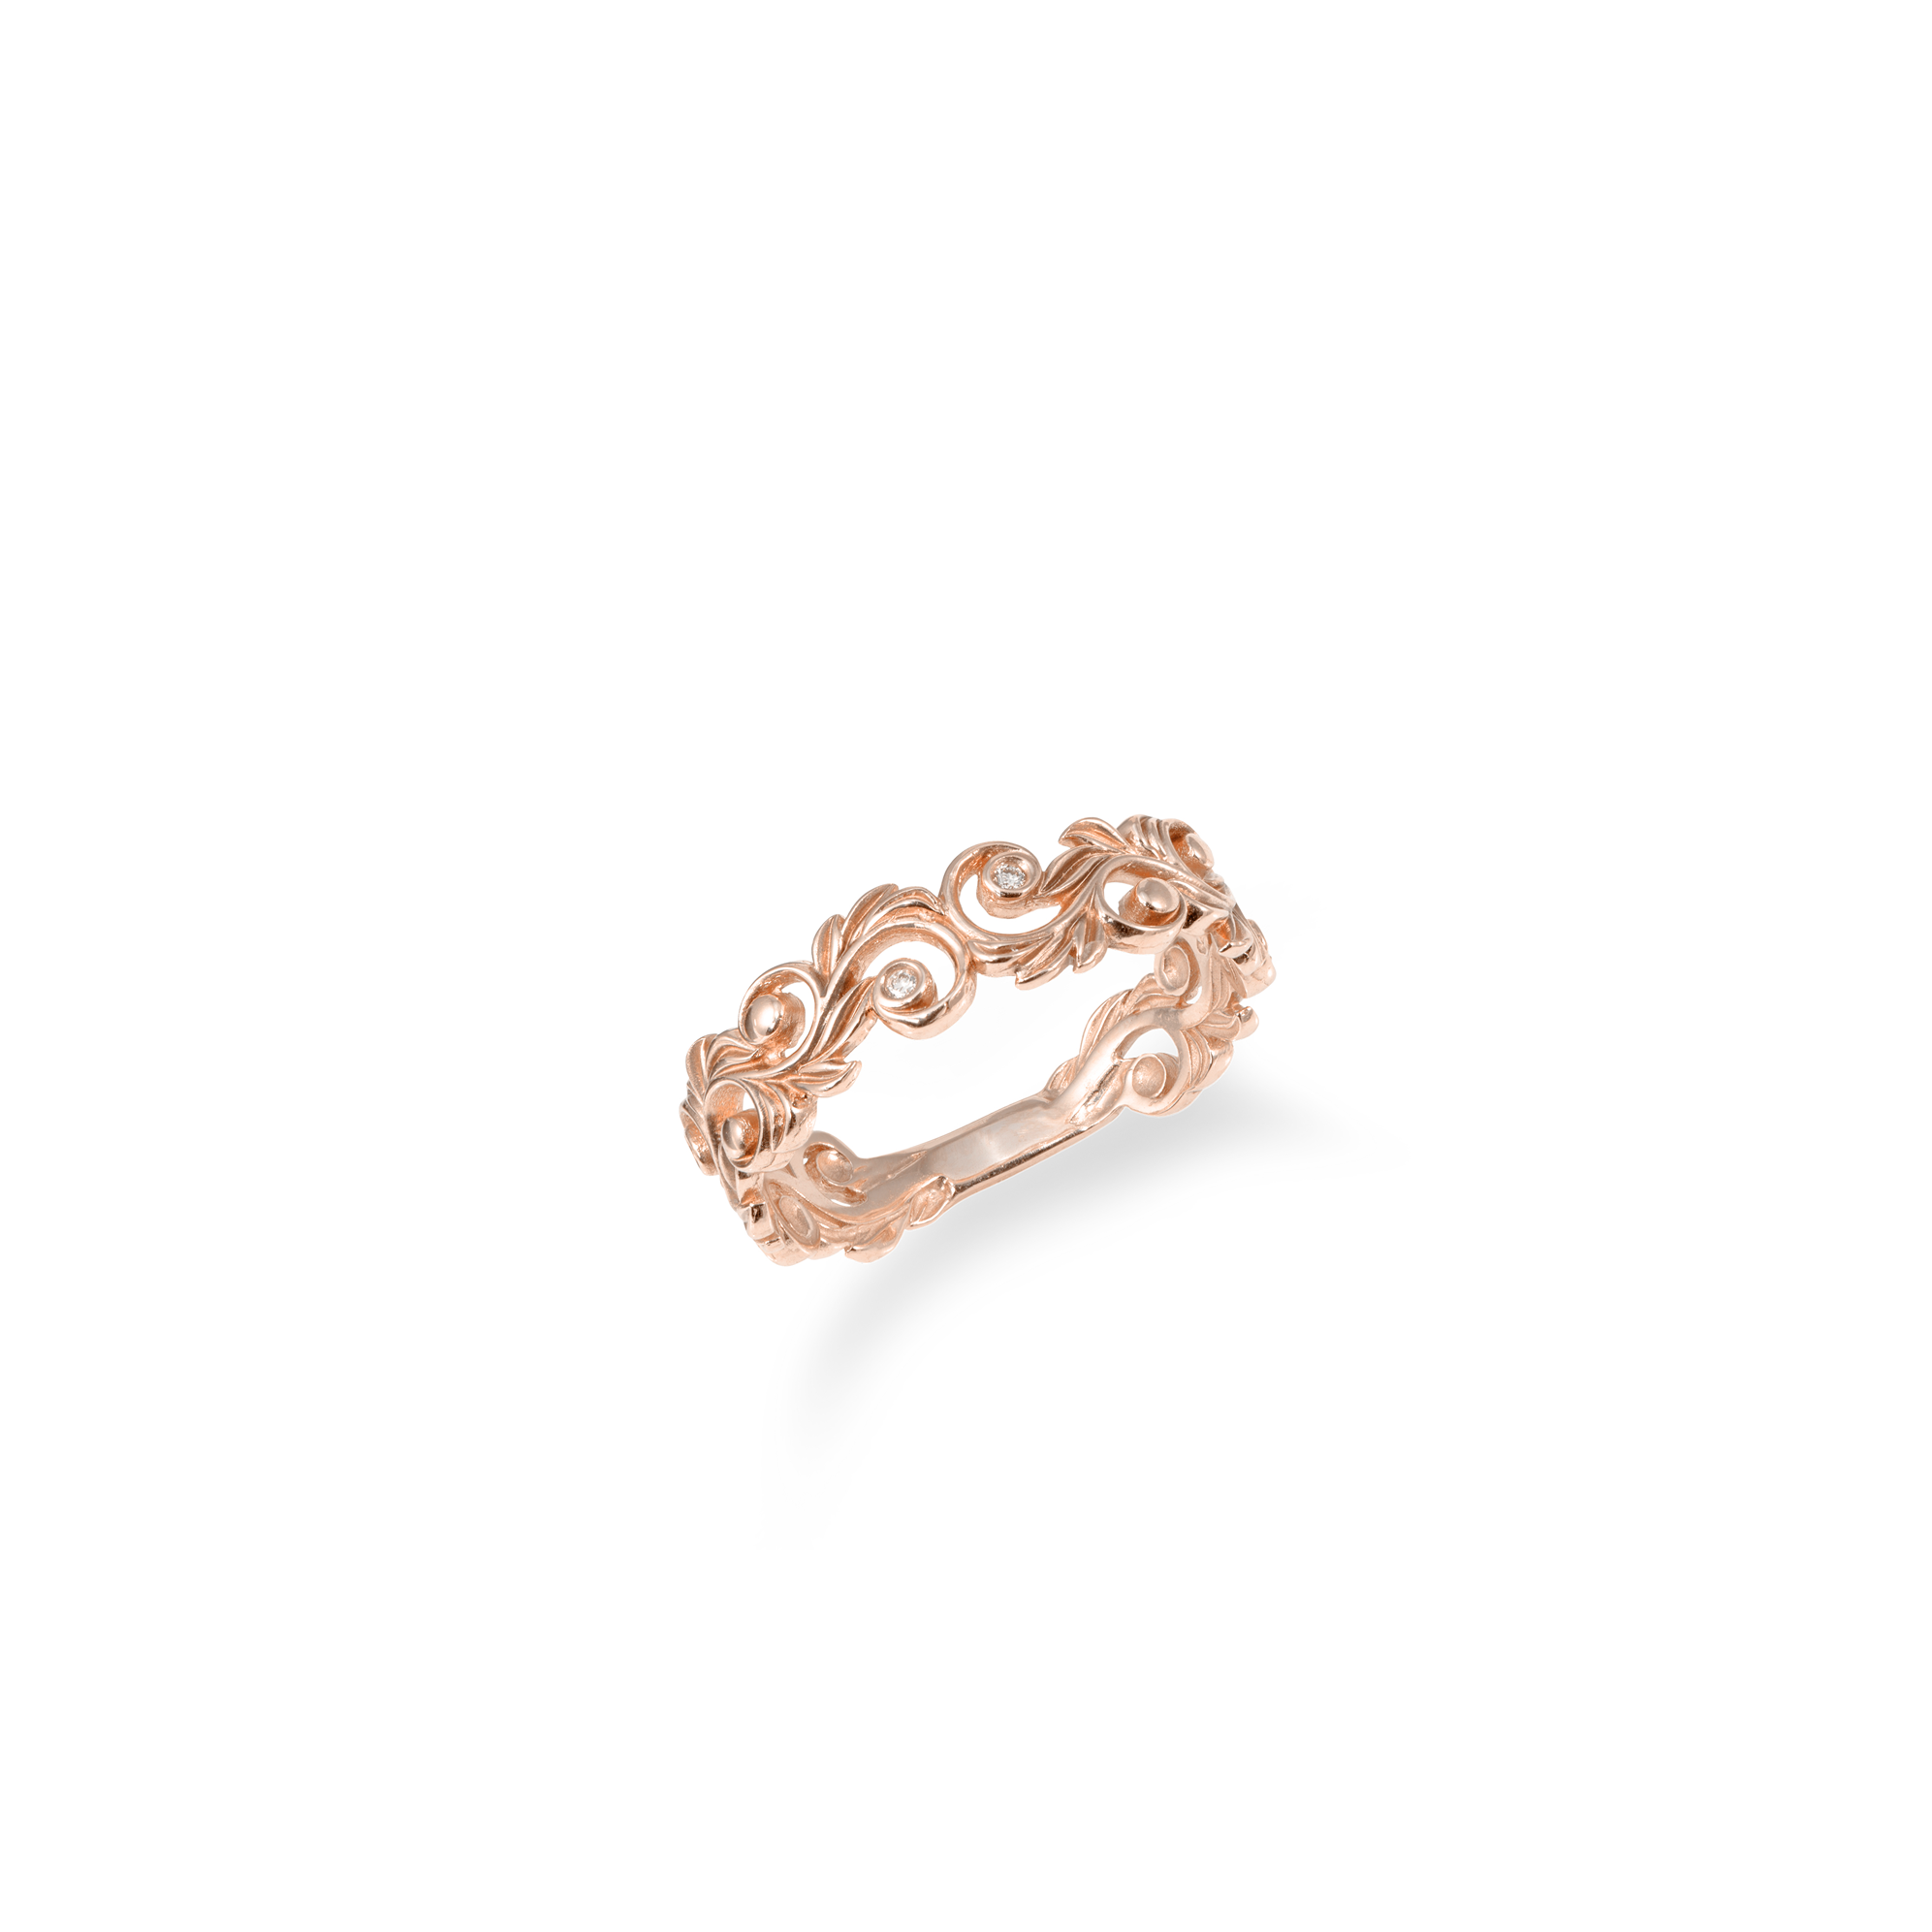 Living Heirloom Ring in Rose Gold with Diamonds - 6mm